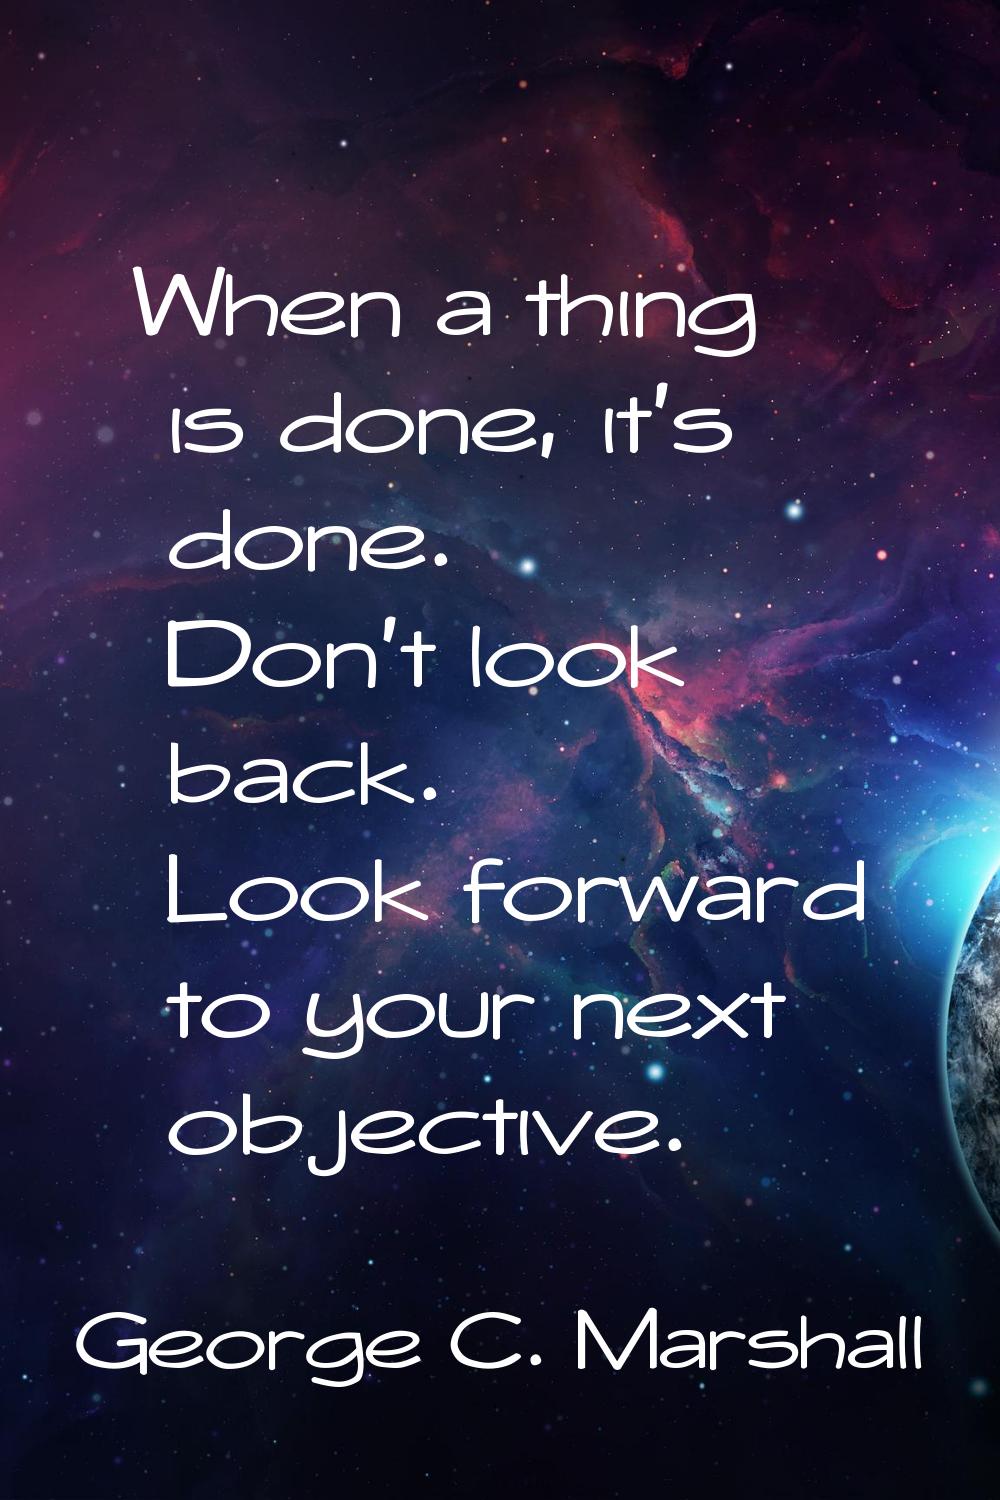 When a thing is done, it's done. Don't look back. Look forward to your next objective.